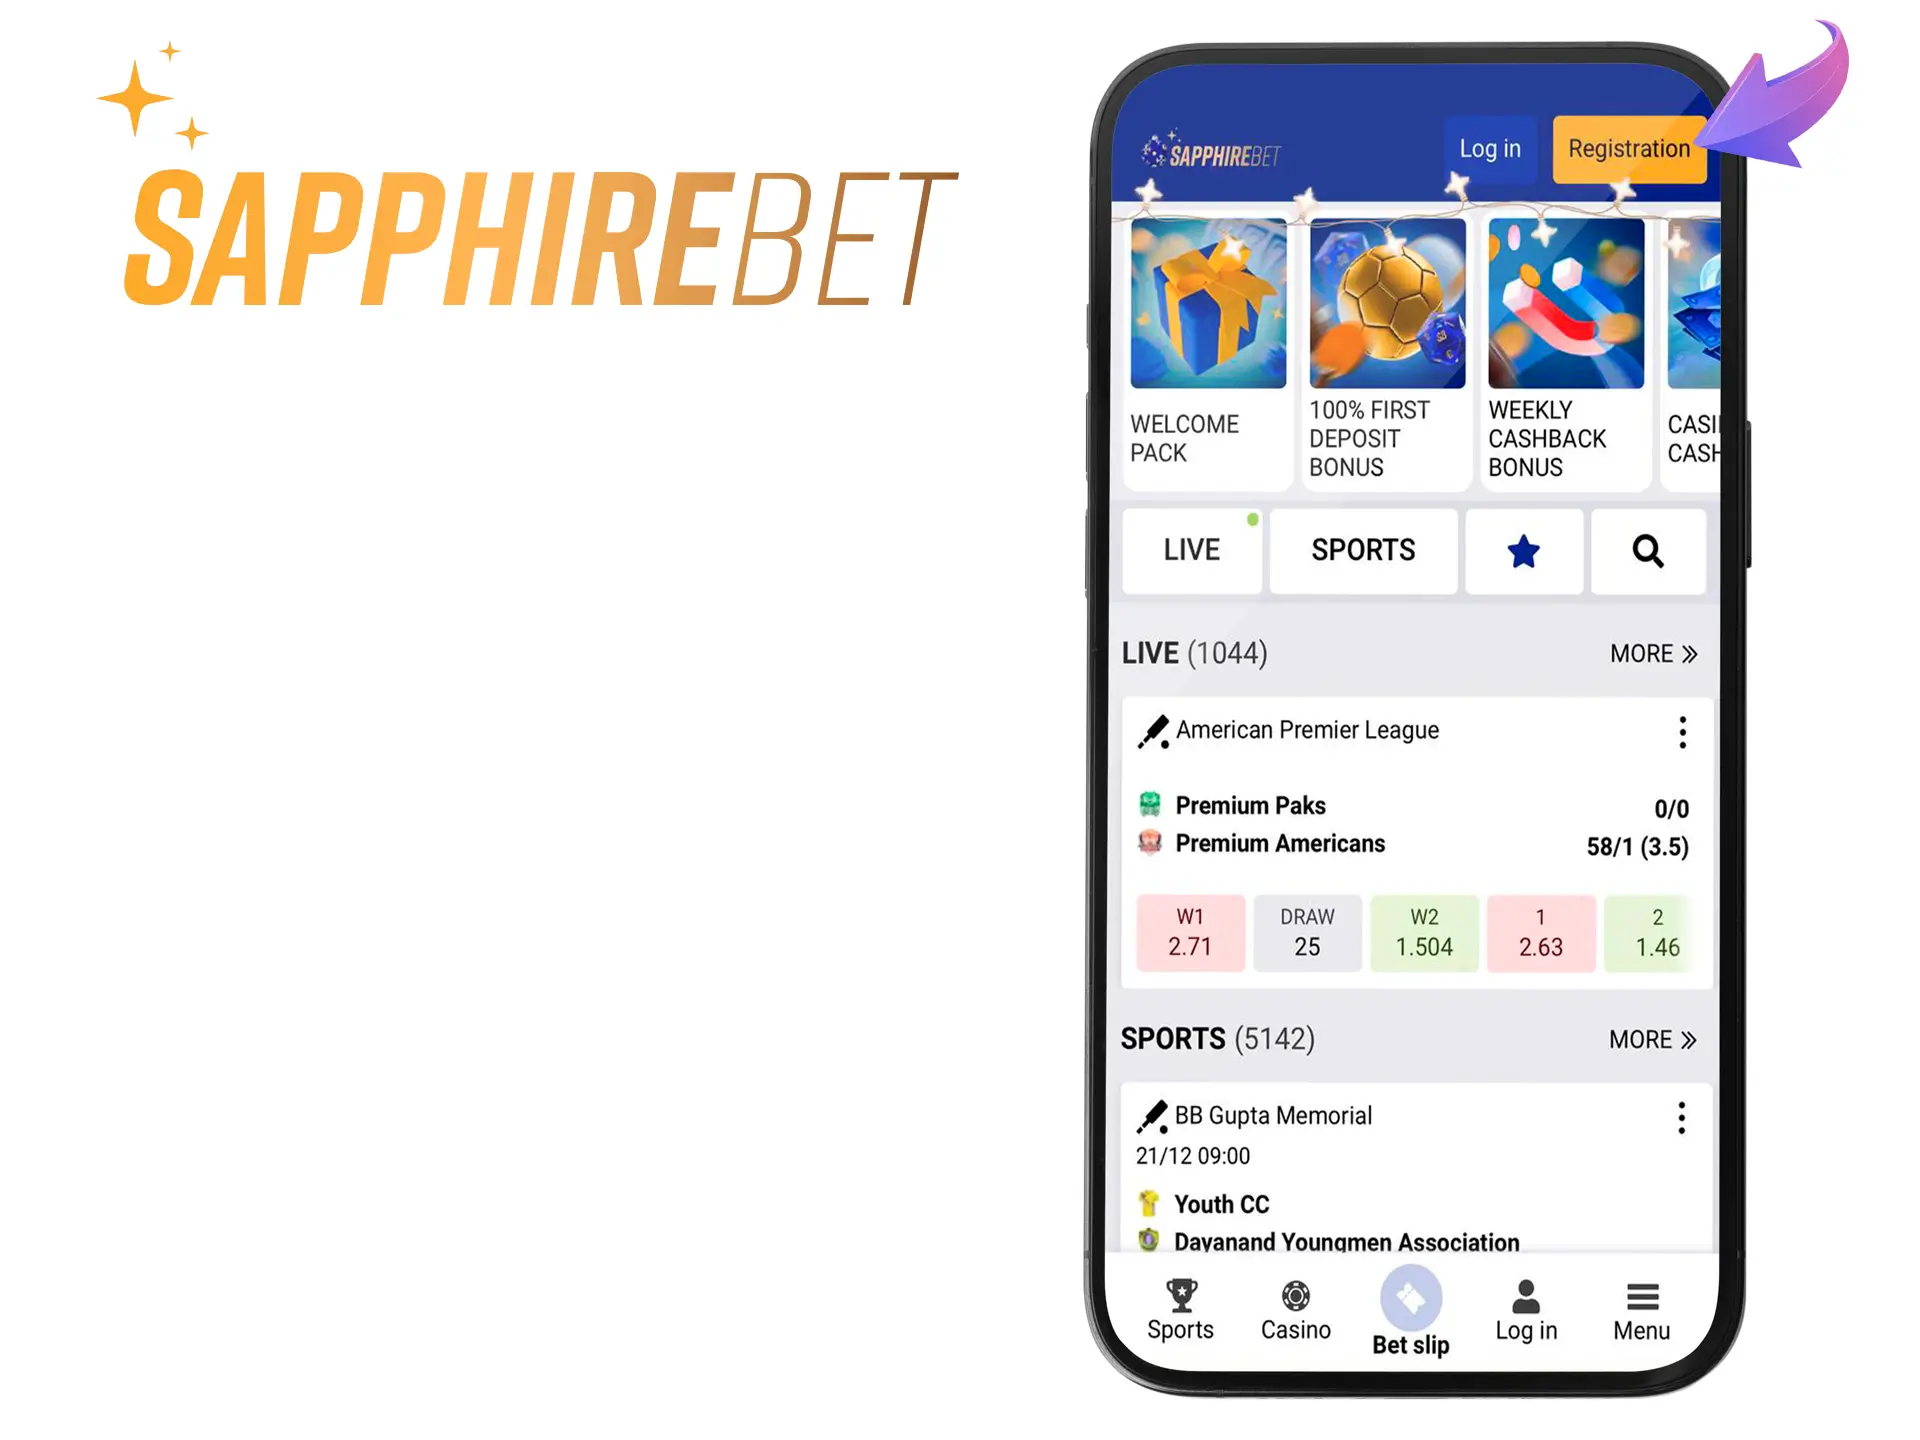 Start your journey by registering on the Sapphirebet website.